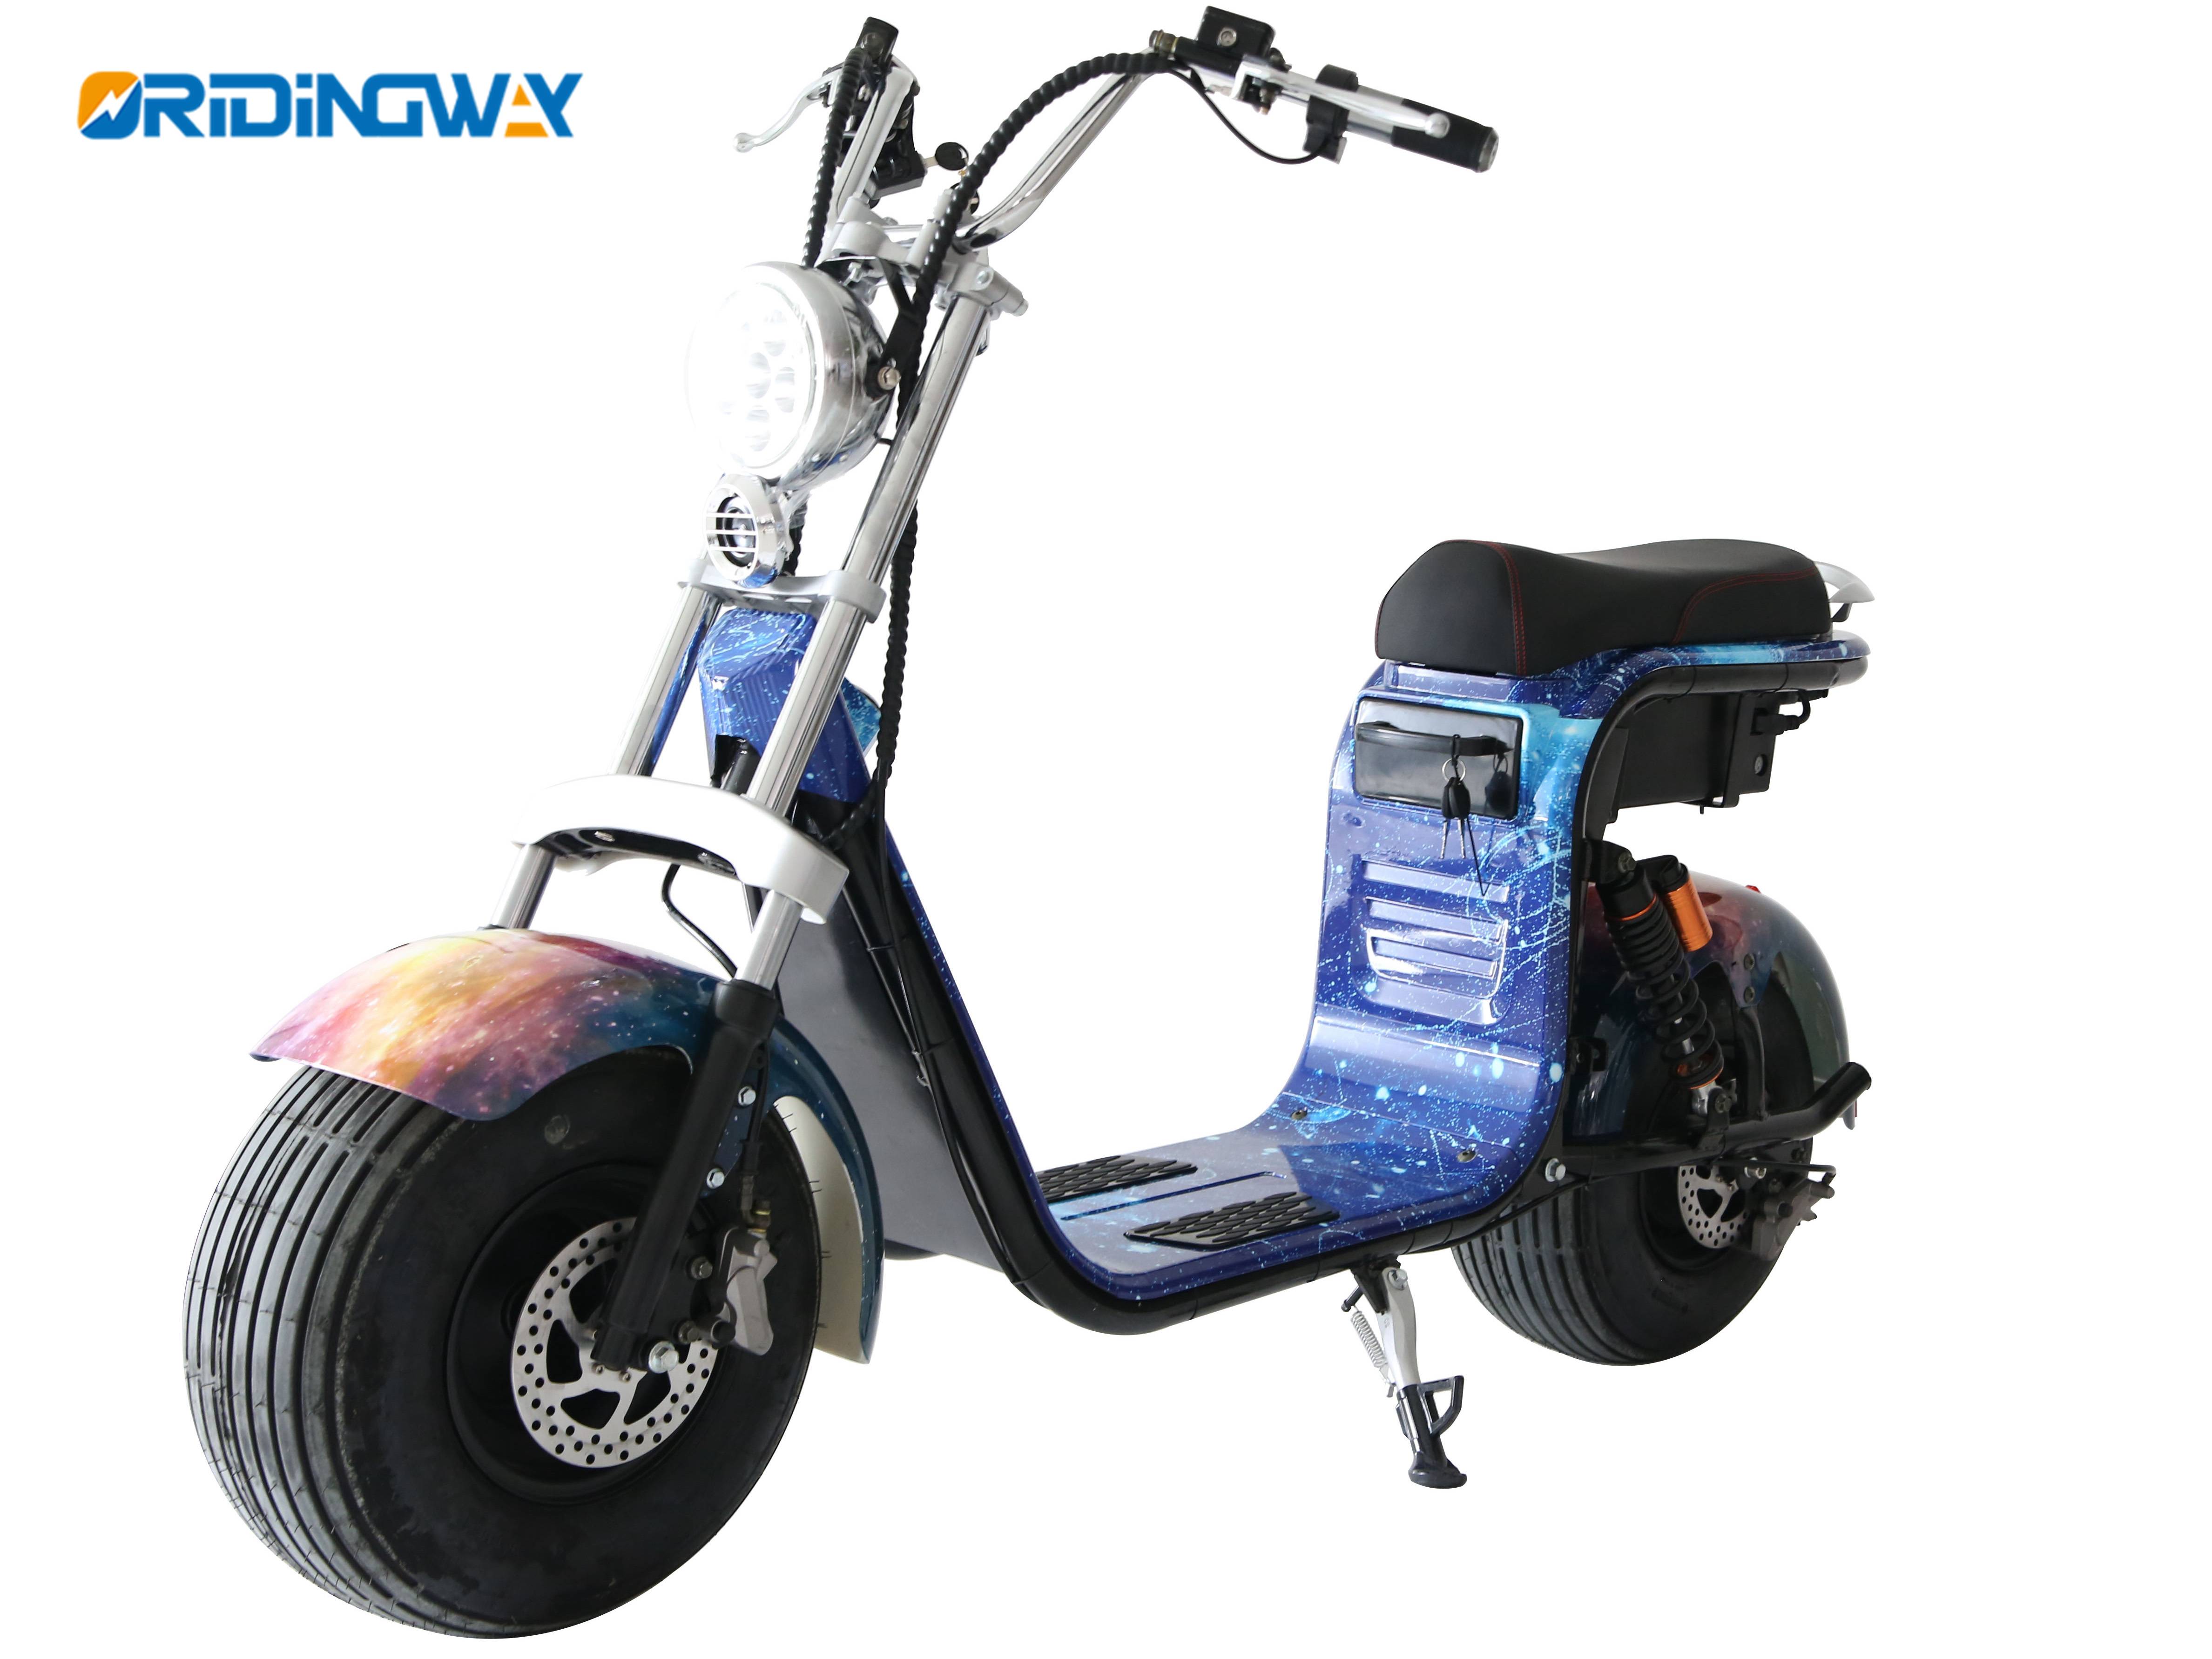 Wholesale Factory Price Electric Mobility Scooter 1000w Citycoco Electric Scooter Big Wheel With Removable Battery Onway Manufacturers And Suppliers Onway